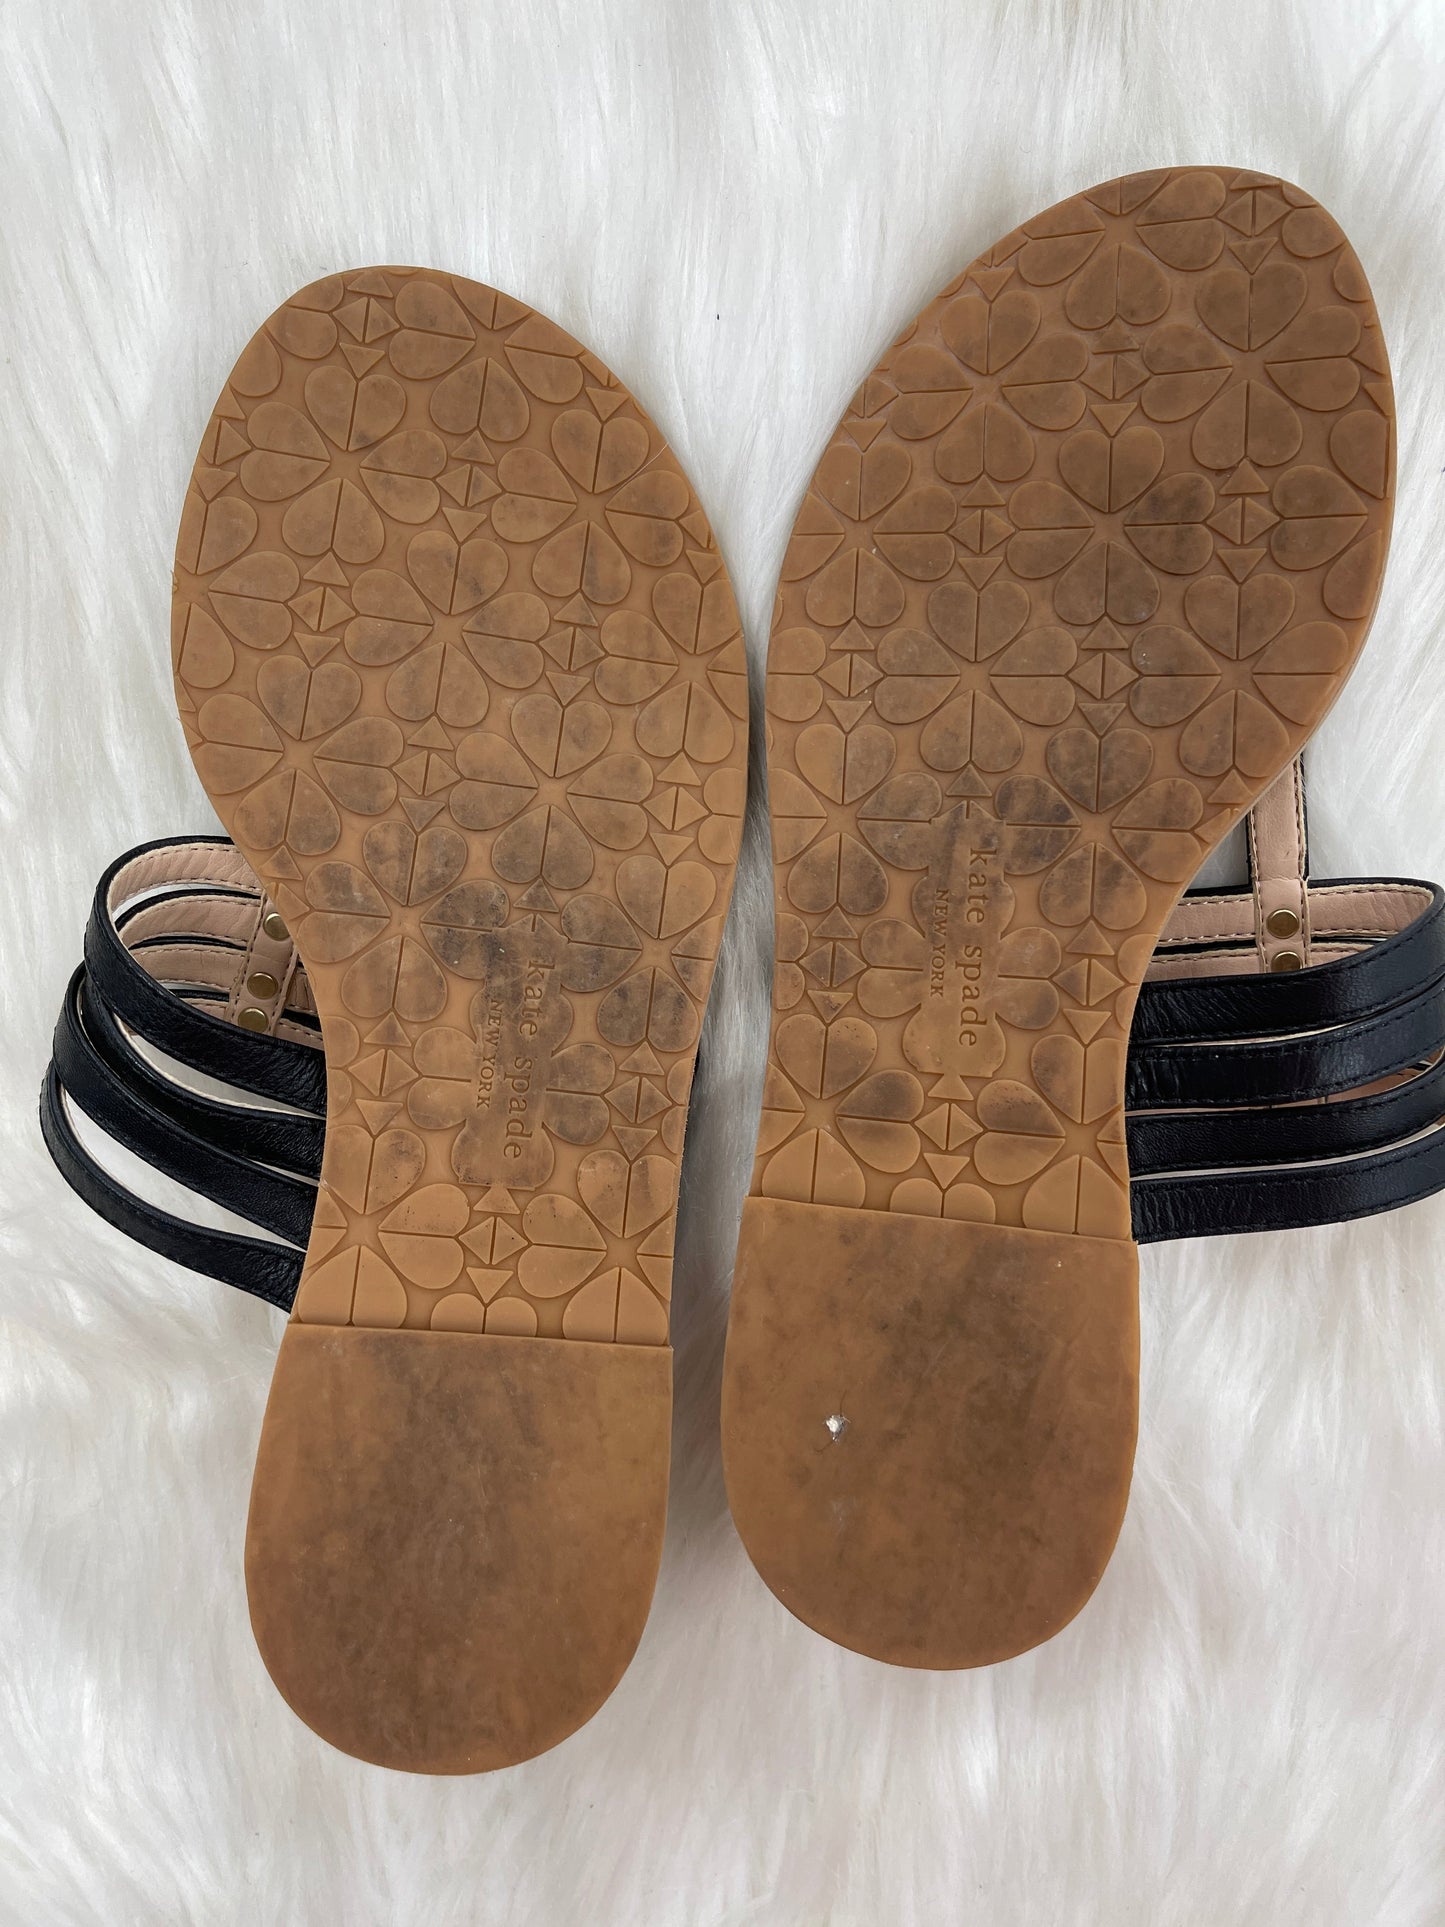 Sandals Flats By Kate Spade  Size: 5.5